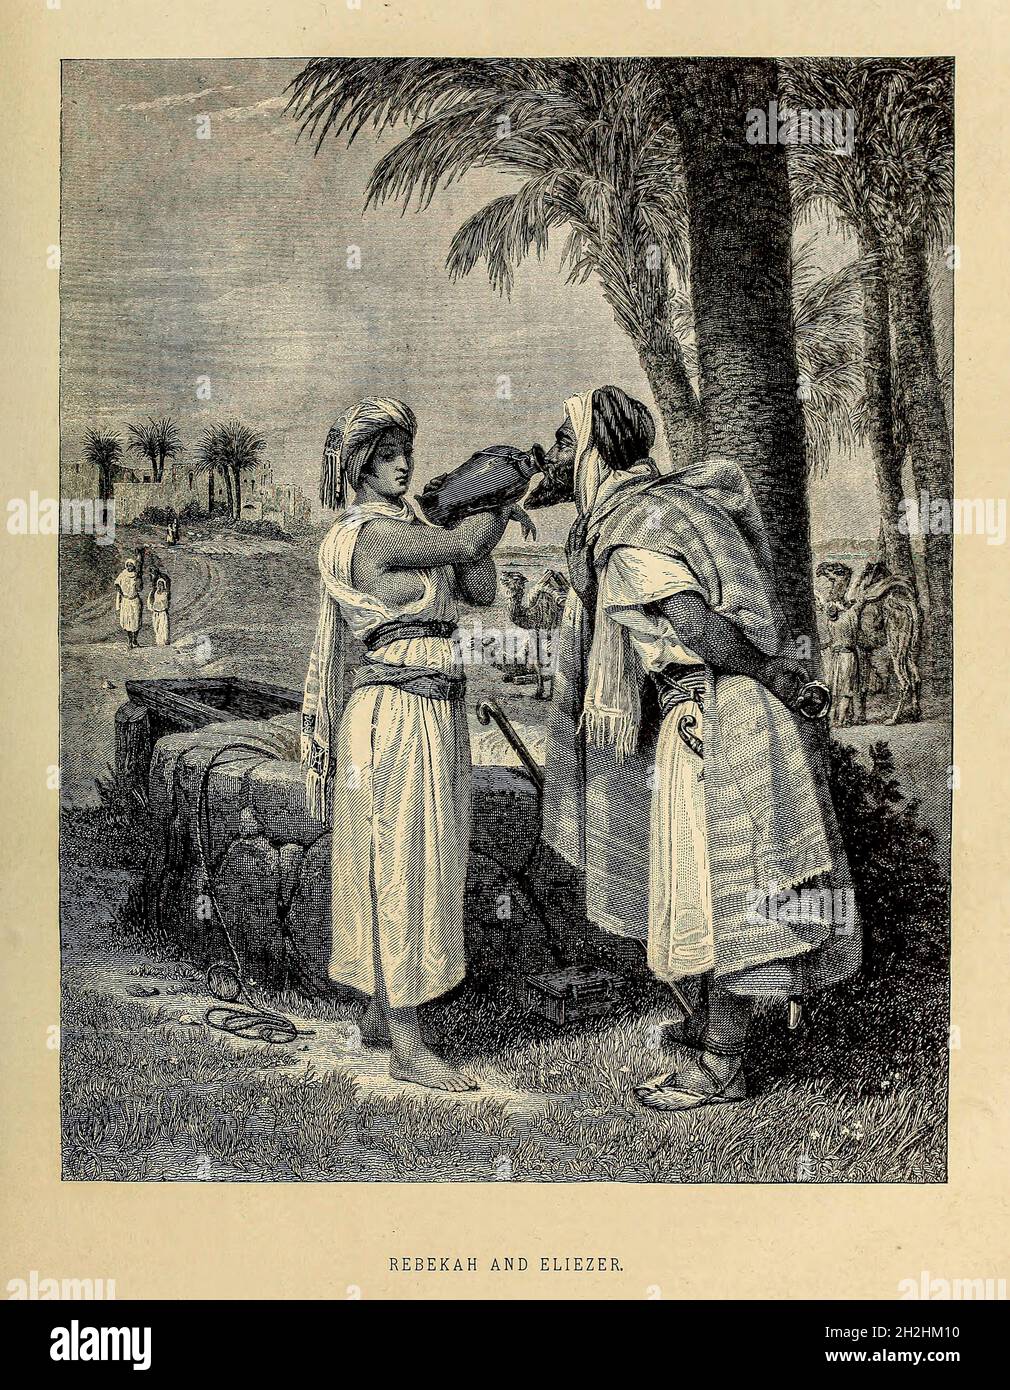 Rebekah and Eliezer at the well from ' The Doré family Bible ' containing the Old and New Testaments, The Apocrypha Embellished with Fine Full-Page Engravings, Illustrations and the Dore Bible Gallery. Published in Philadelphia by William T. Amies in 1883 Stock Photo